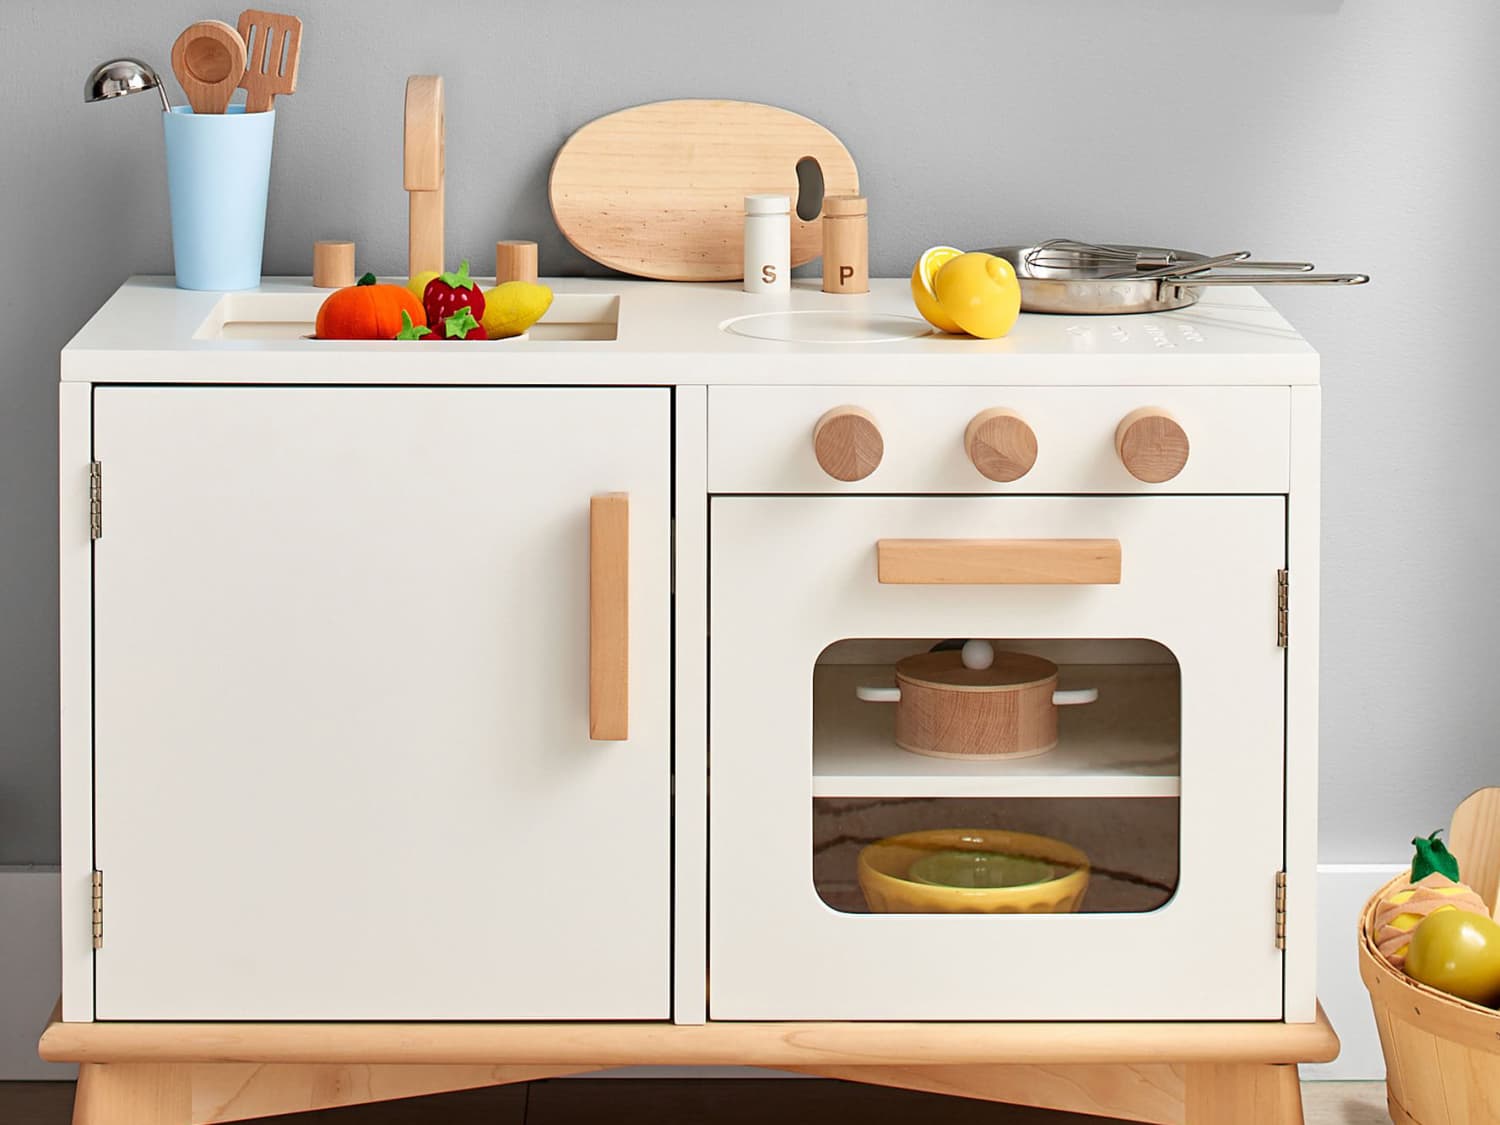 The Best Wooden Play Kitchens and Accessories